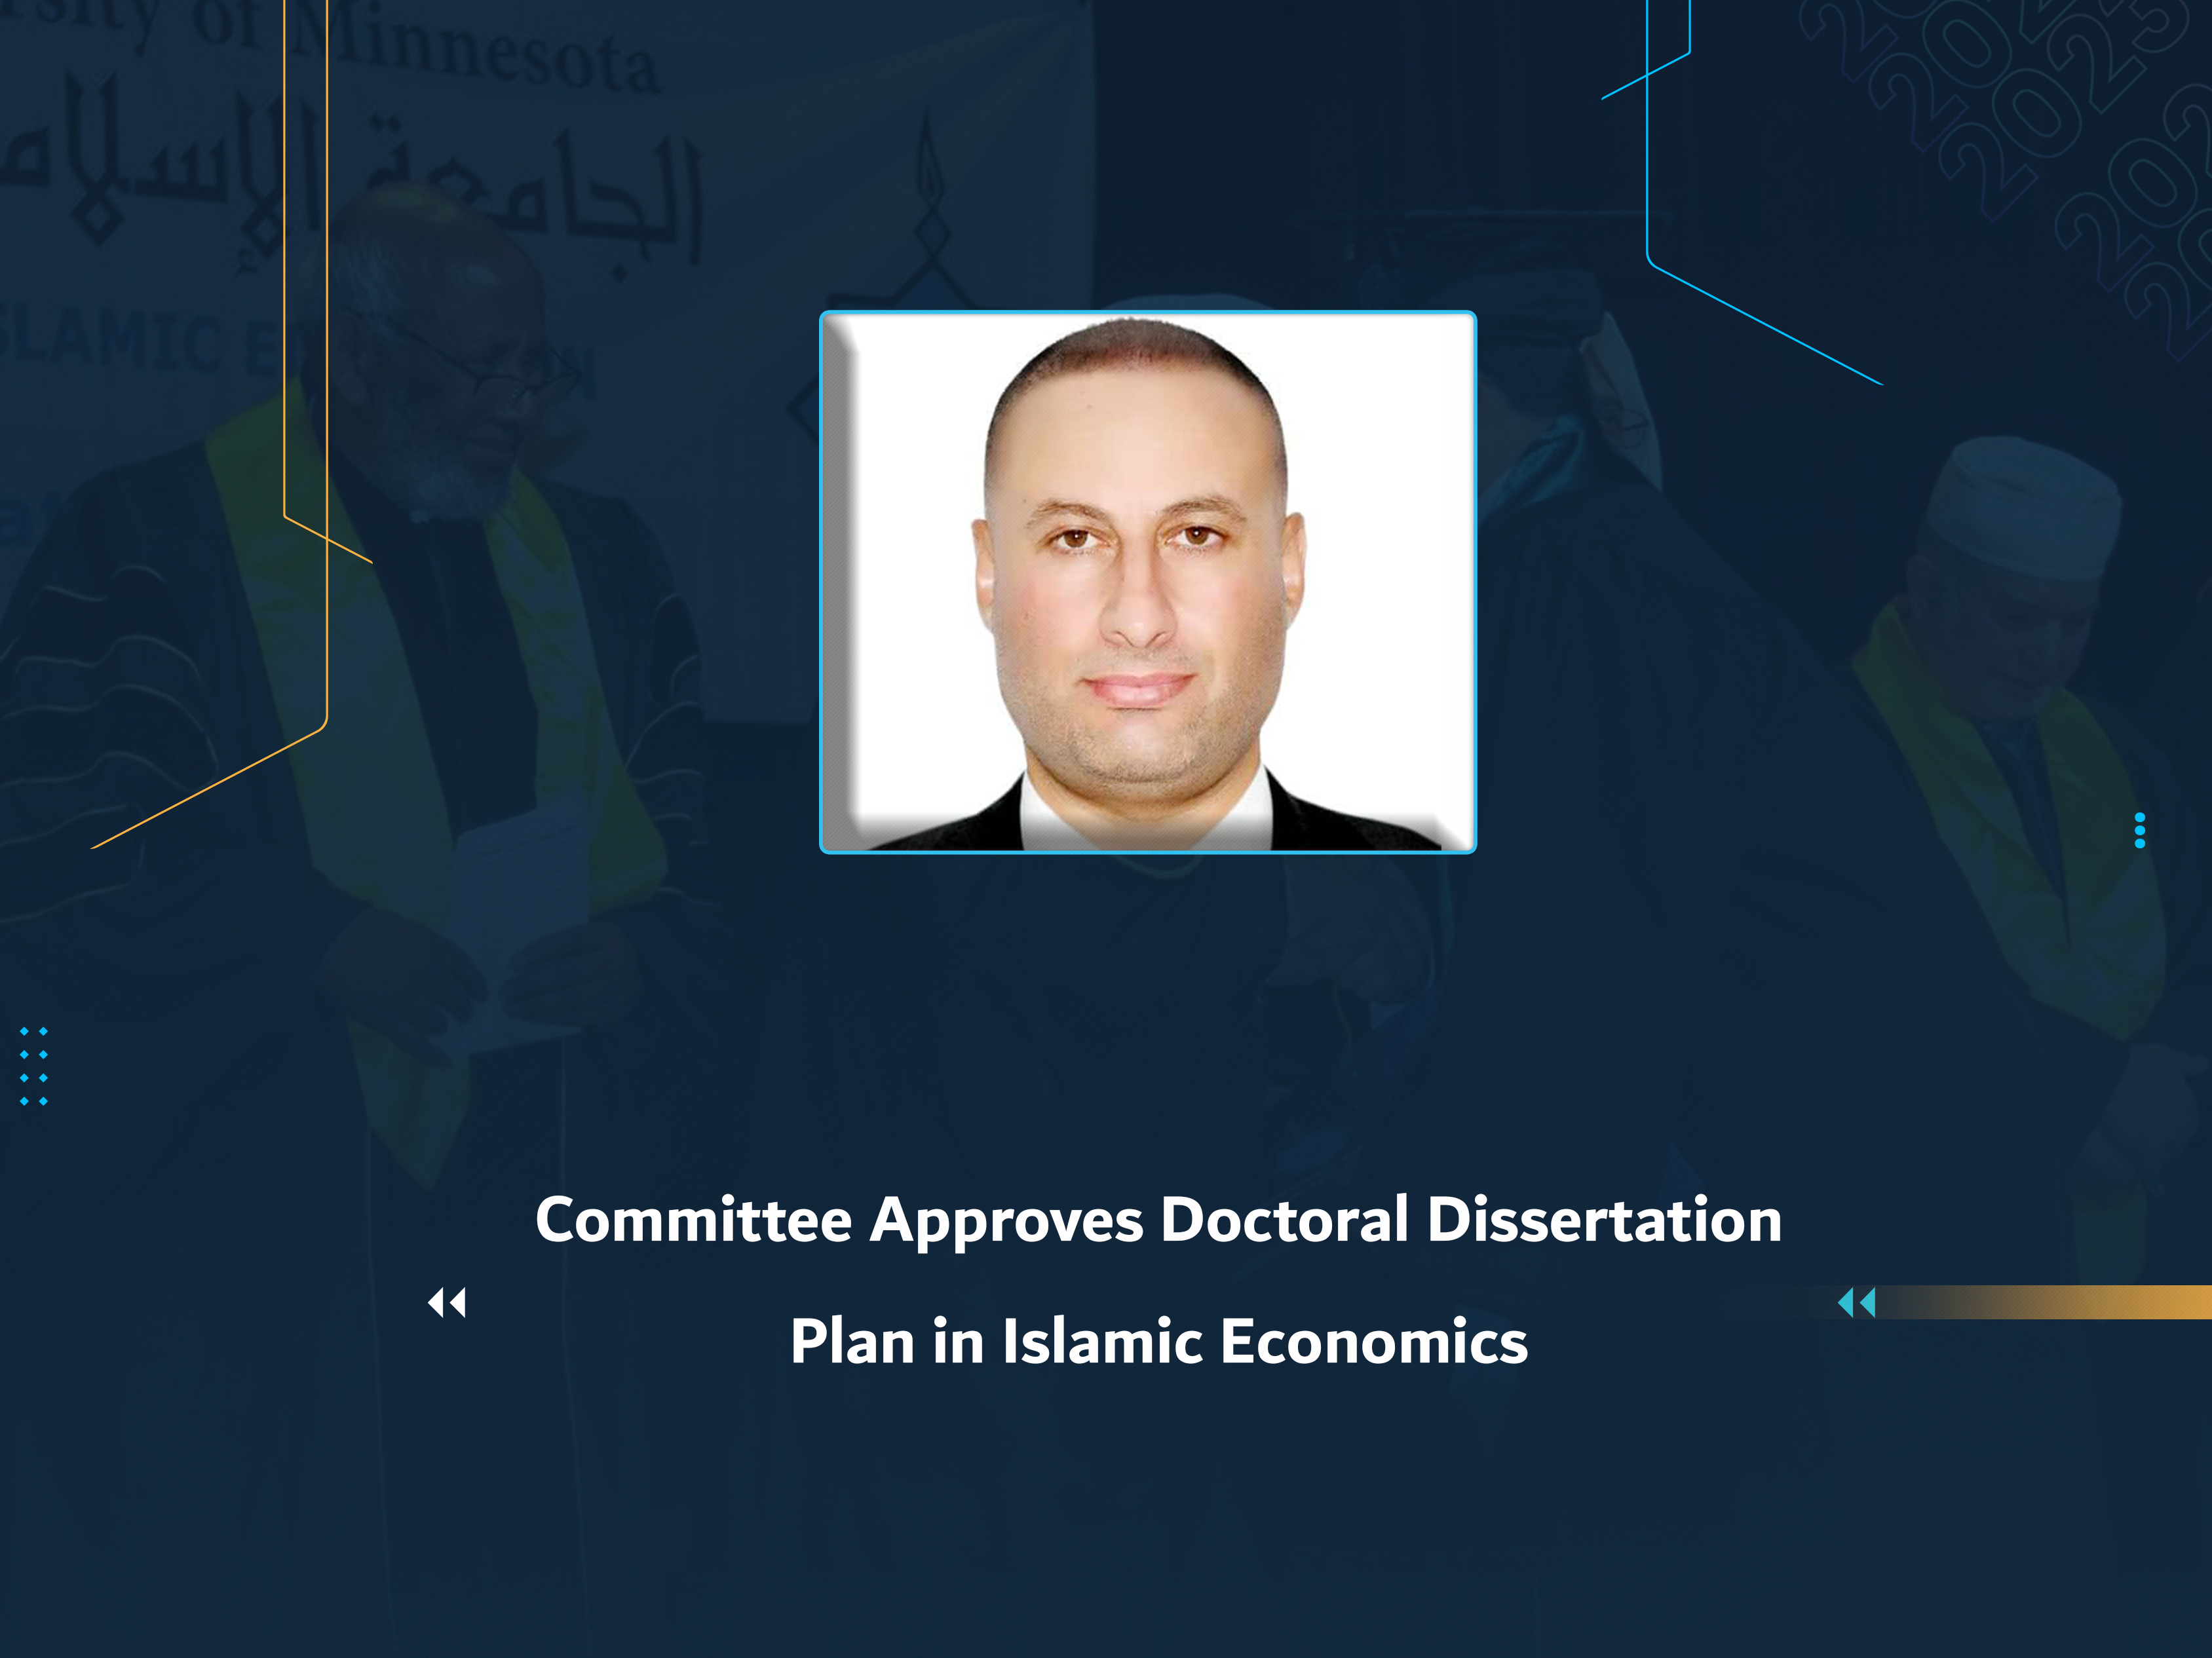 Committee Approves Doctoral Dissertation Plan in Islamic Economics